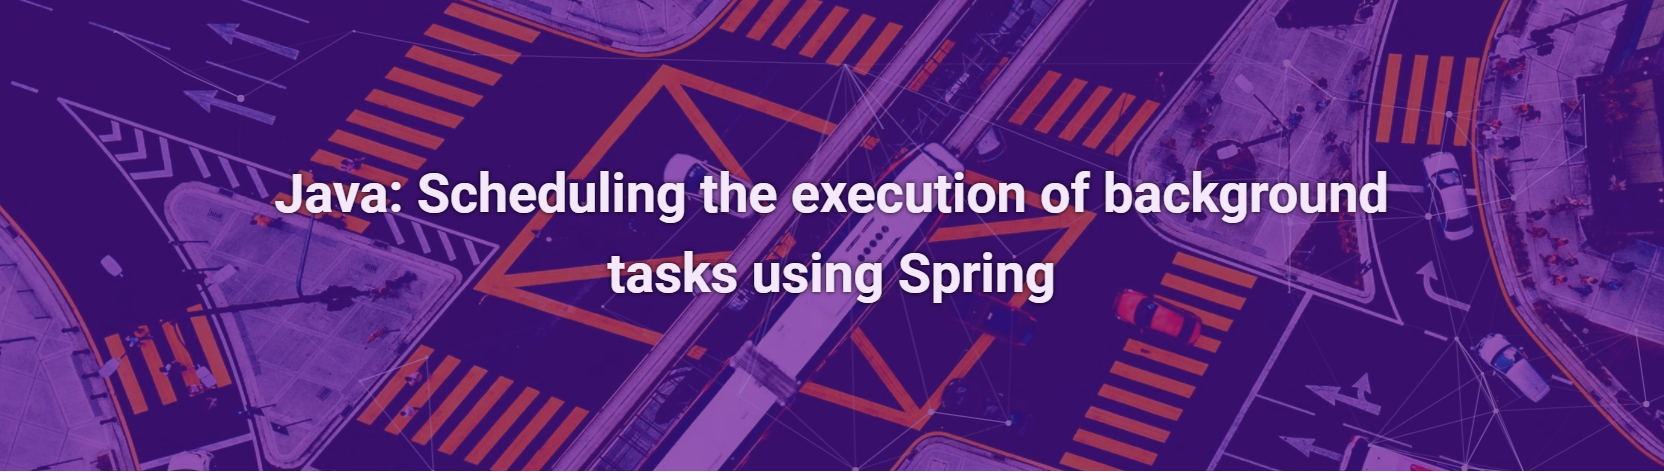 Java: Scheduling the execution of background tasks using Spring